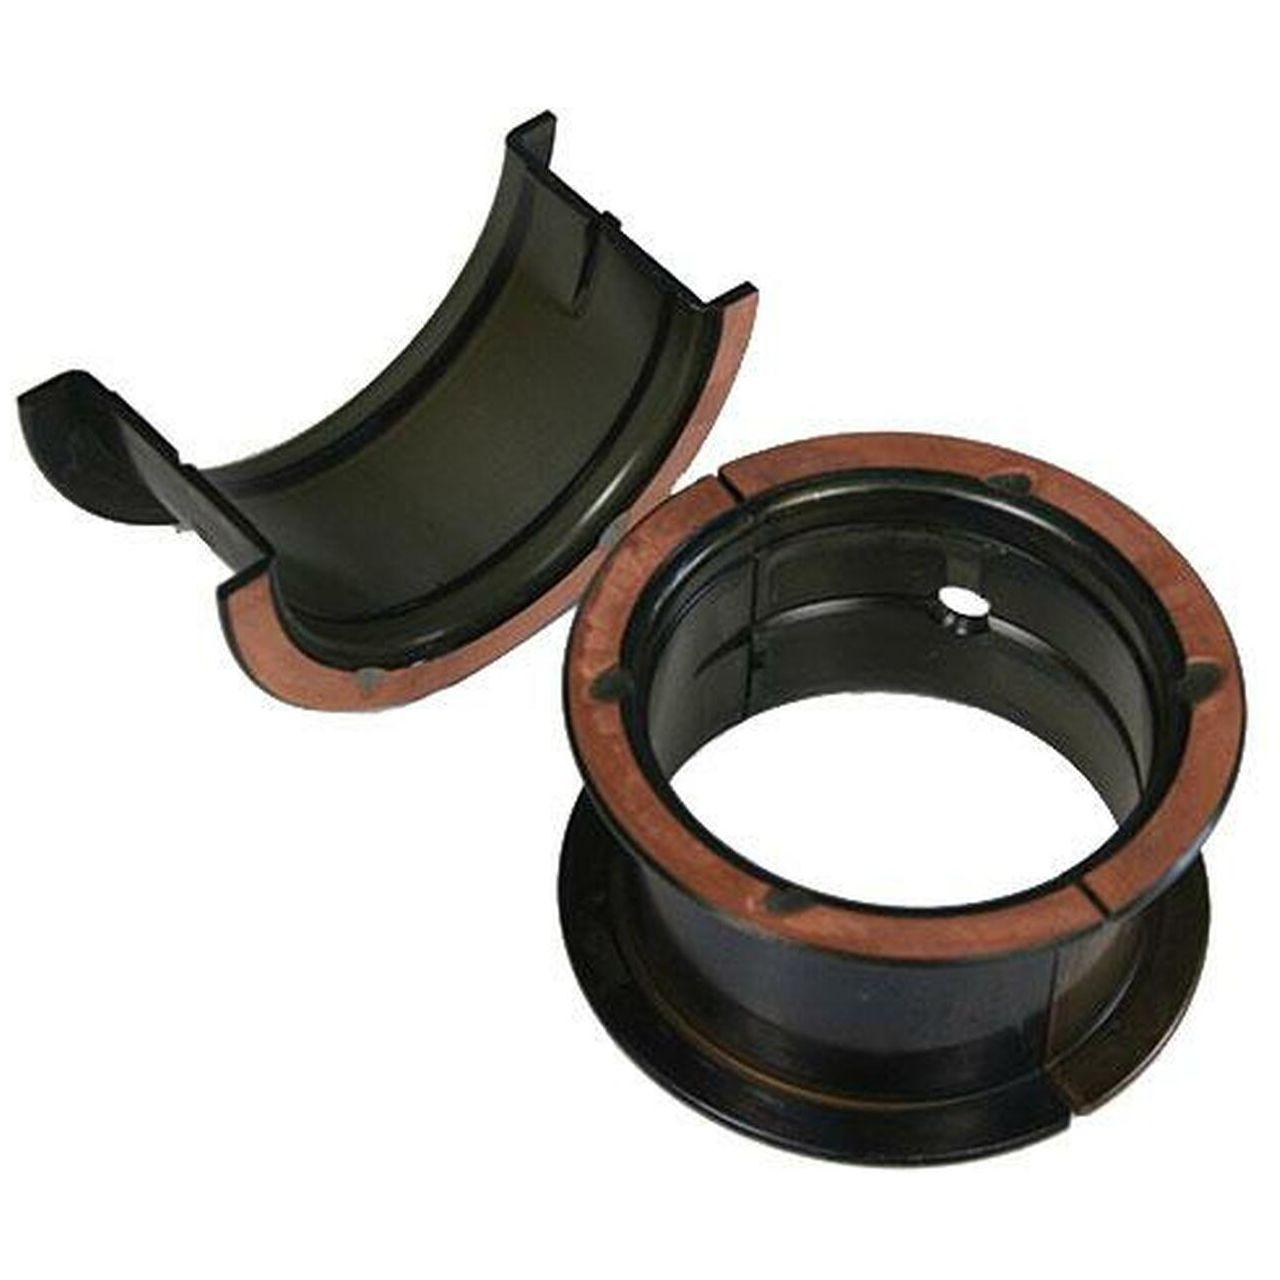 ACL Honda F20C/F22C 0.25mm Oversized High Performance Main Bearing Set - SMINKpower Performance Parts ACL5M1913H-.25 ACL